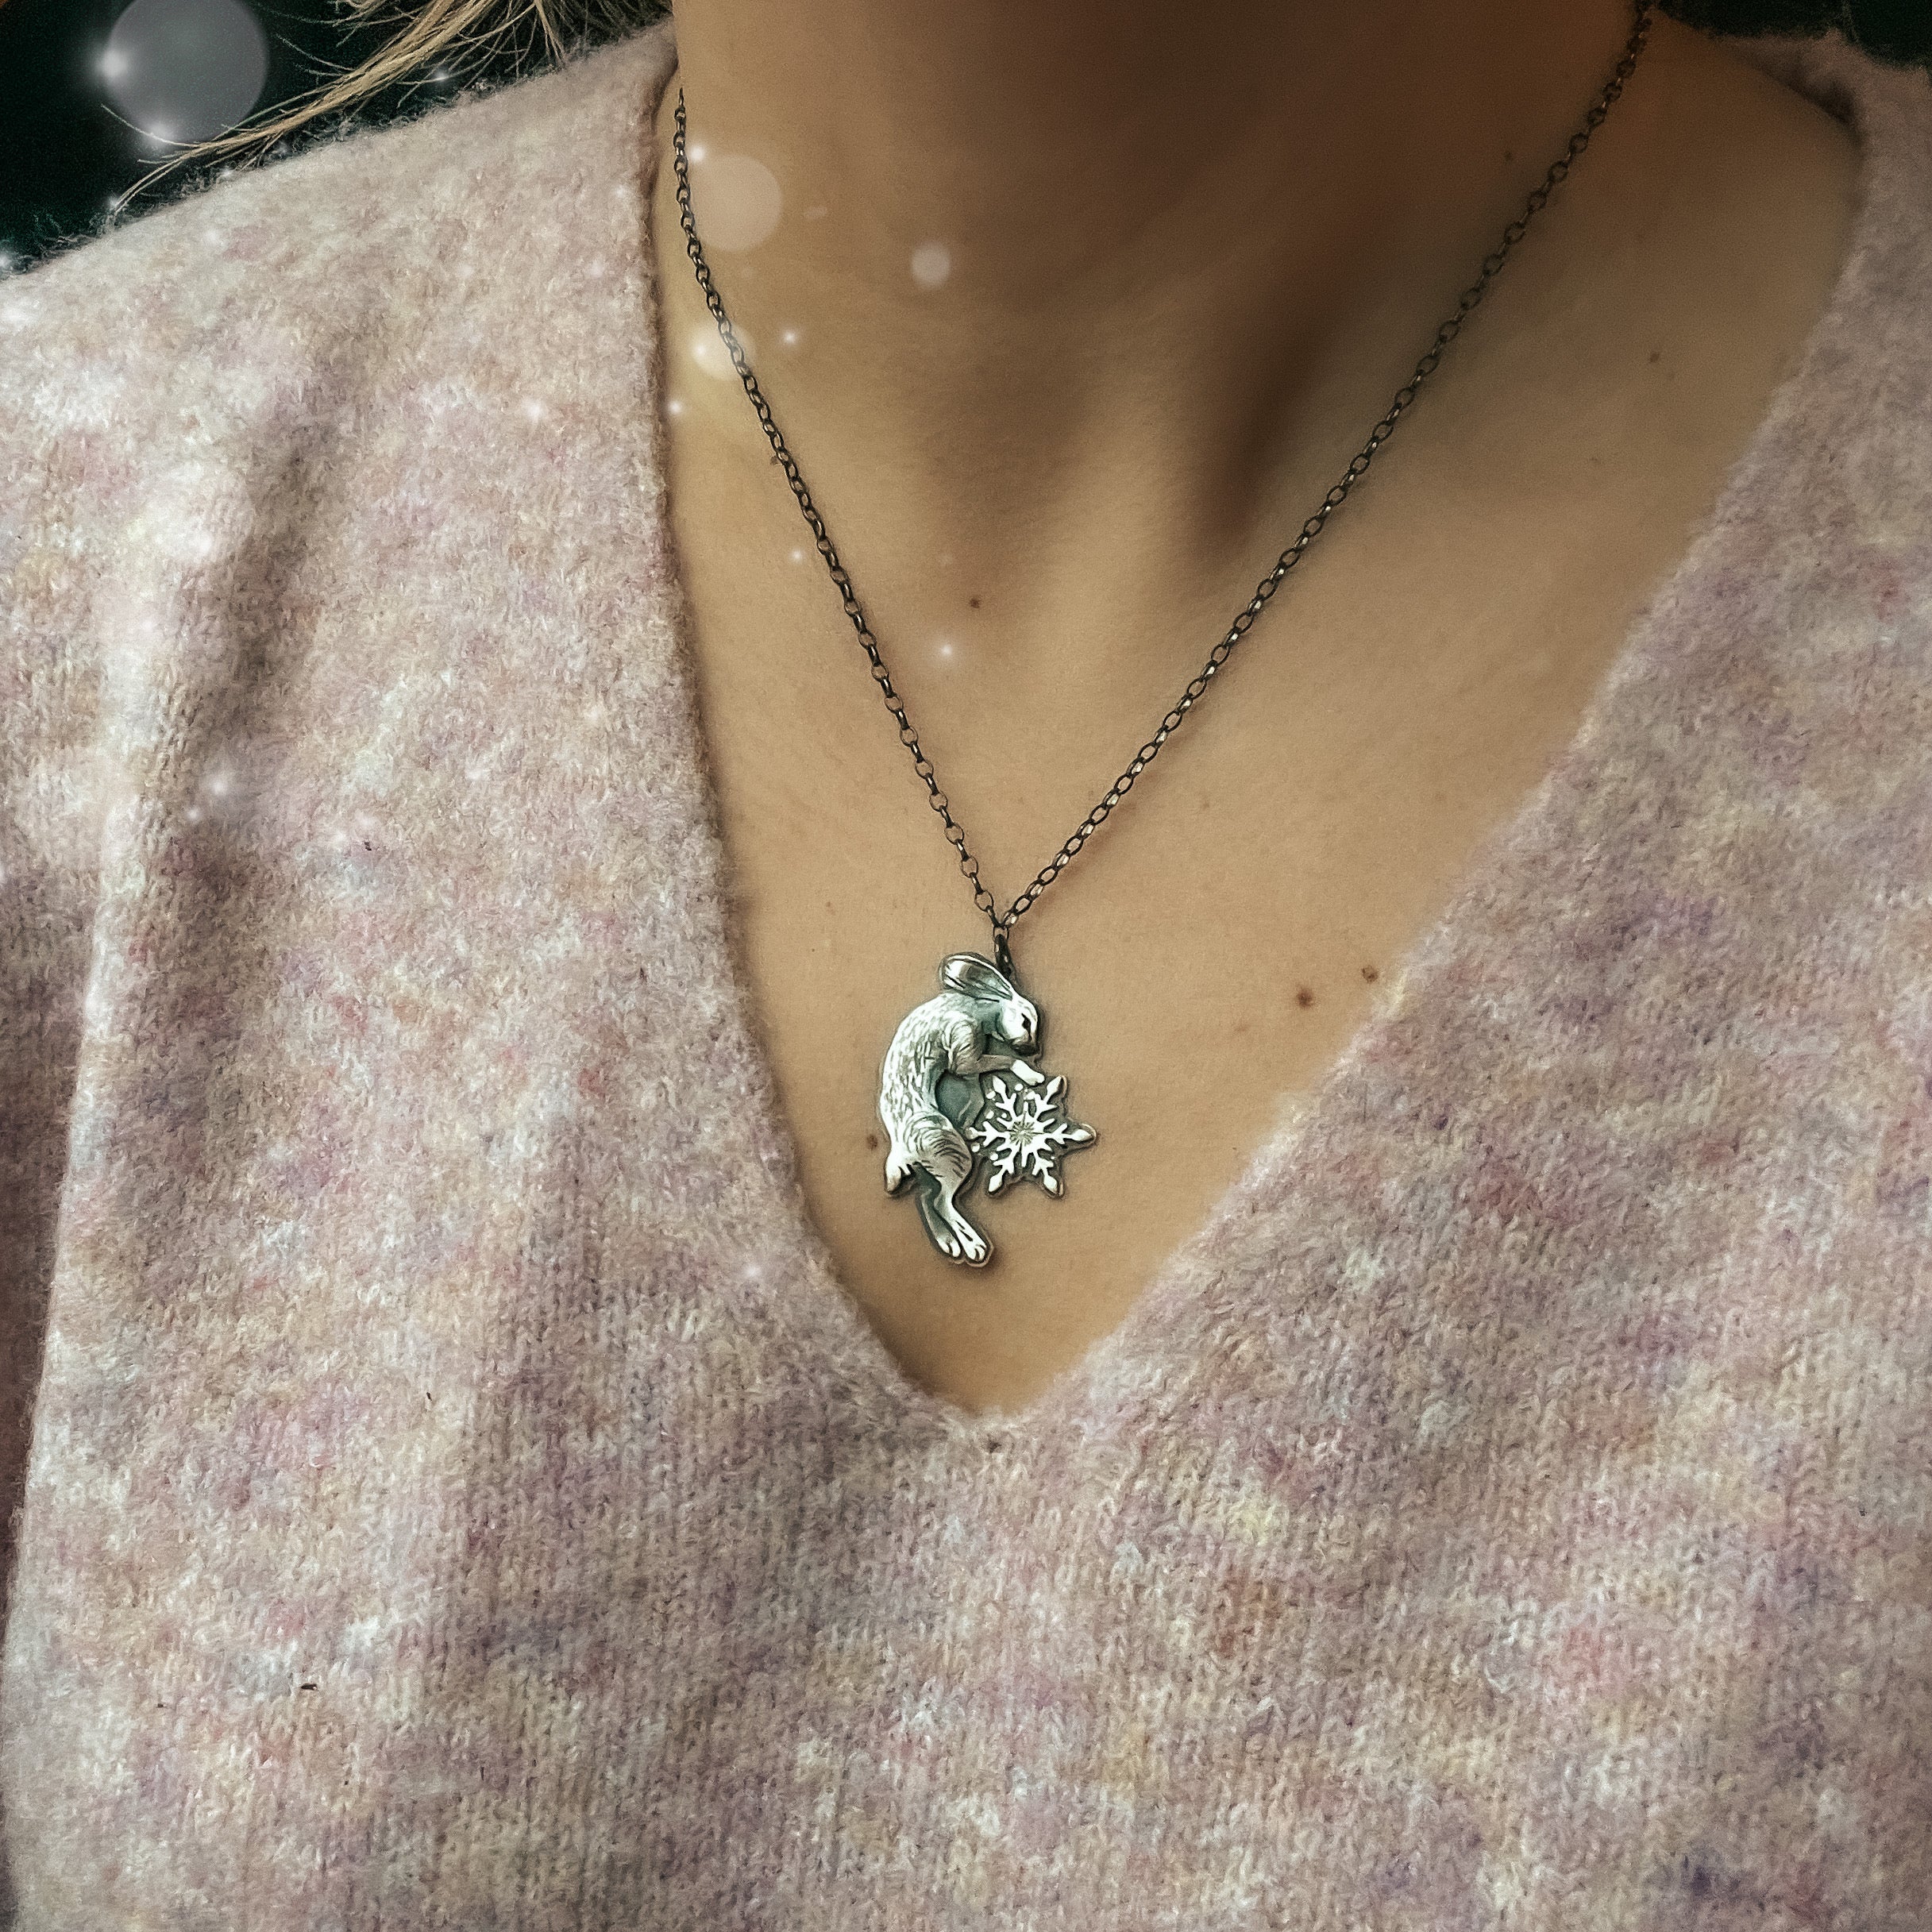 The Winter Hare Necklace